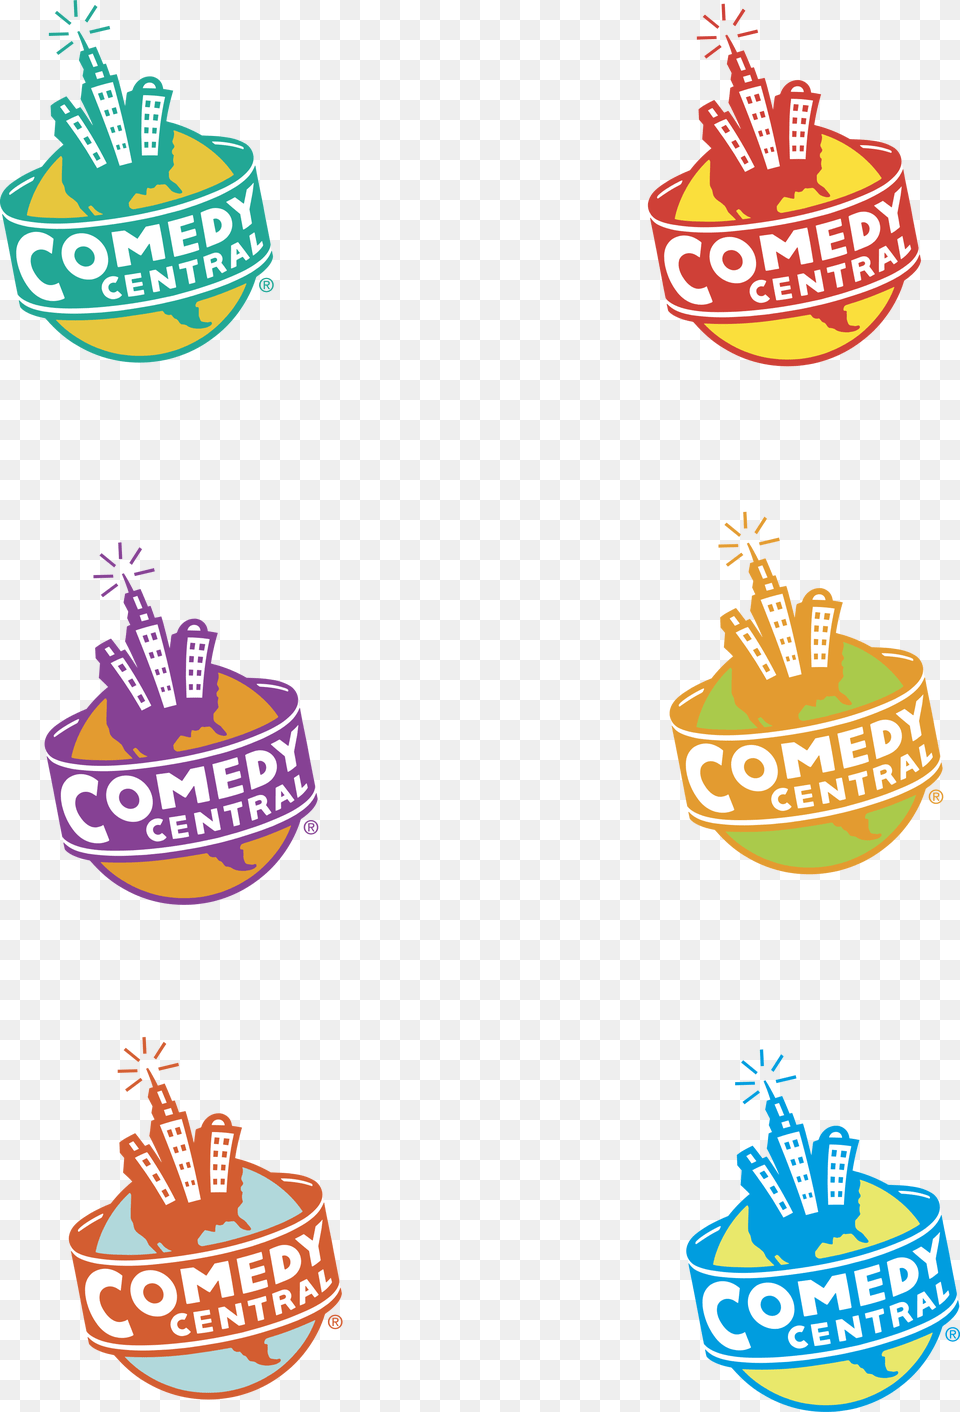 Comedy Central Logos Logo Transparent Comedy Central Logo Colors, Sticker, Dynamite, Weapon Png Image